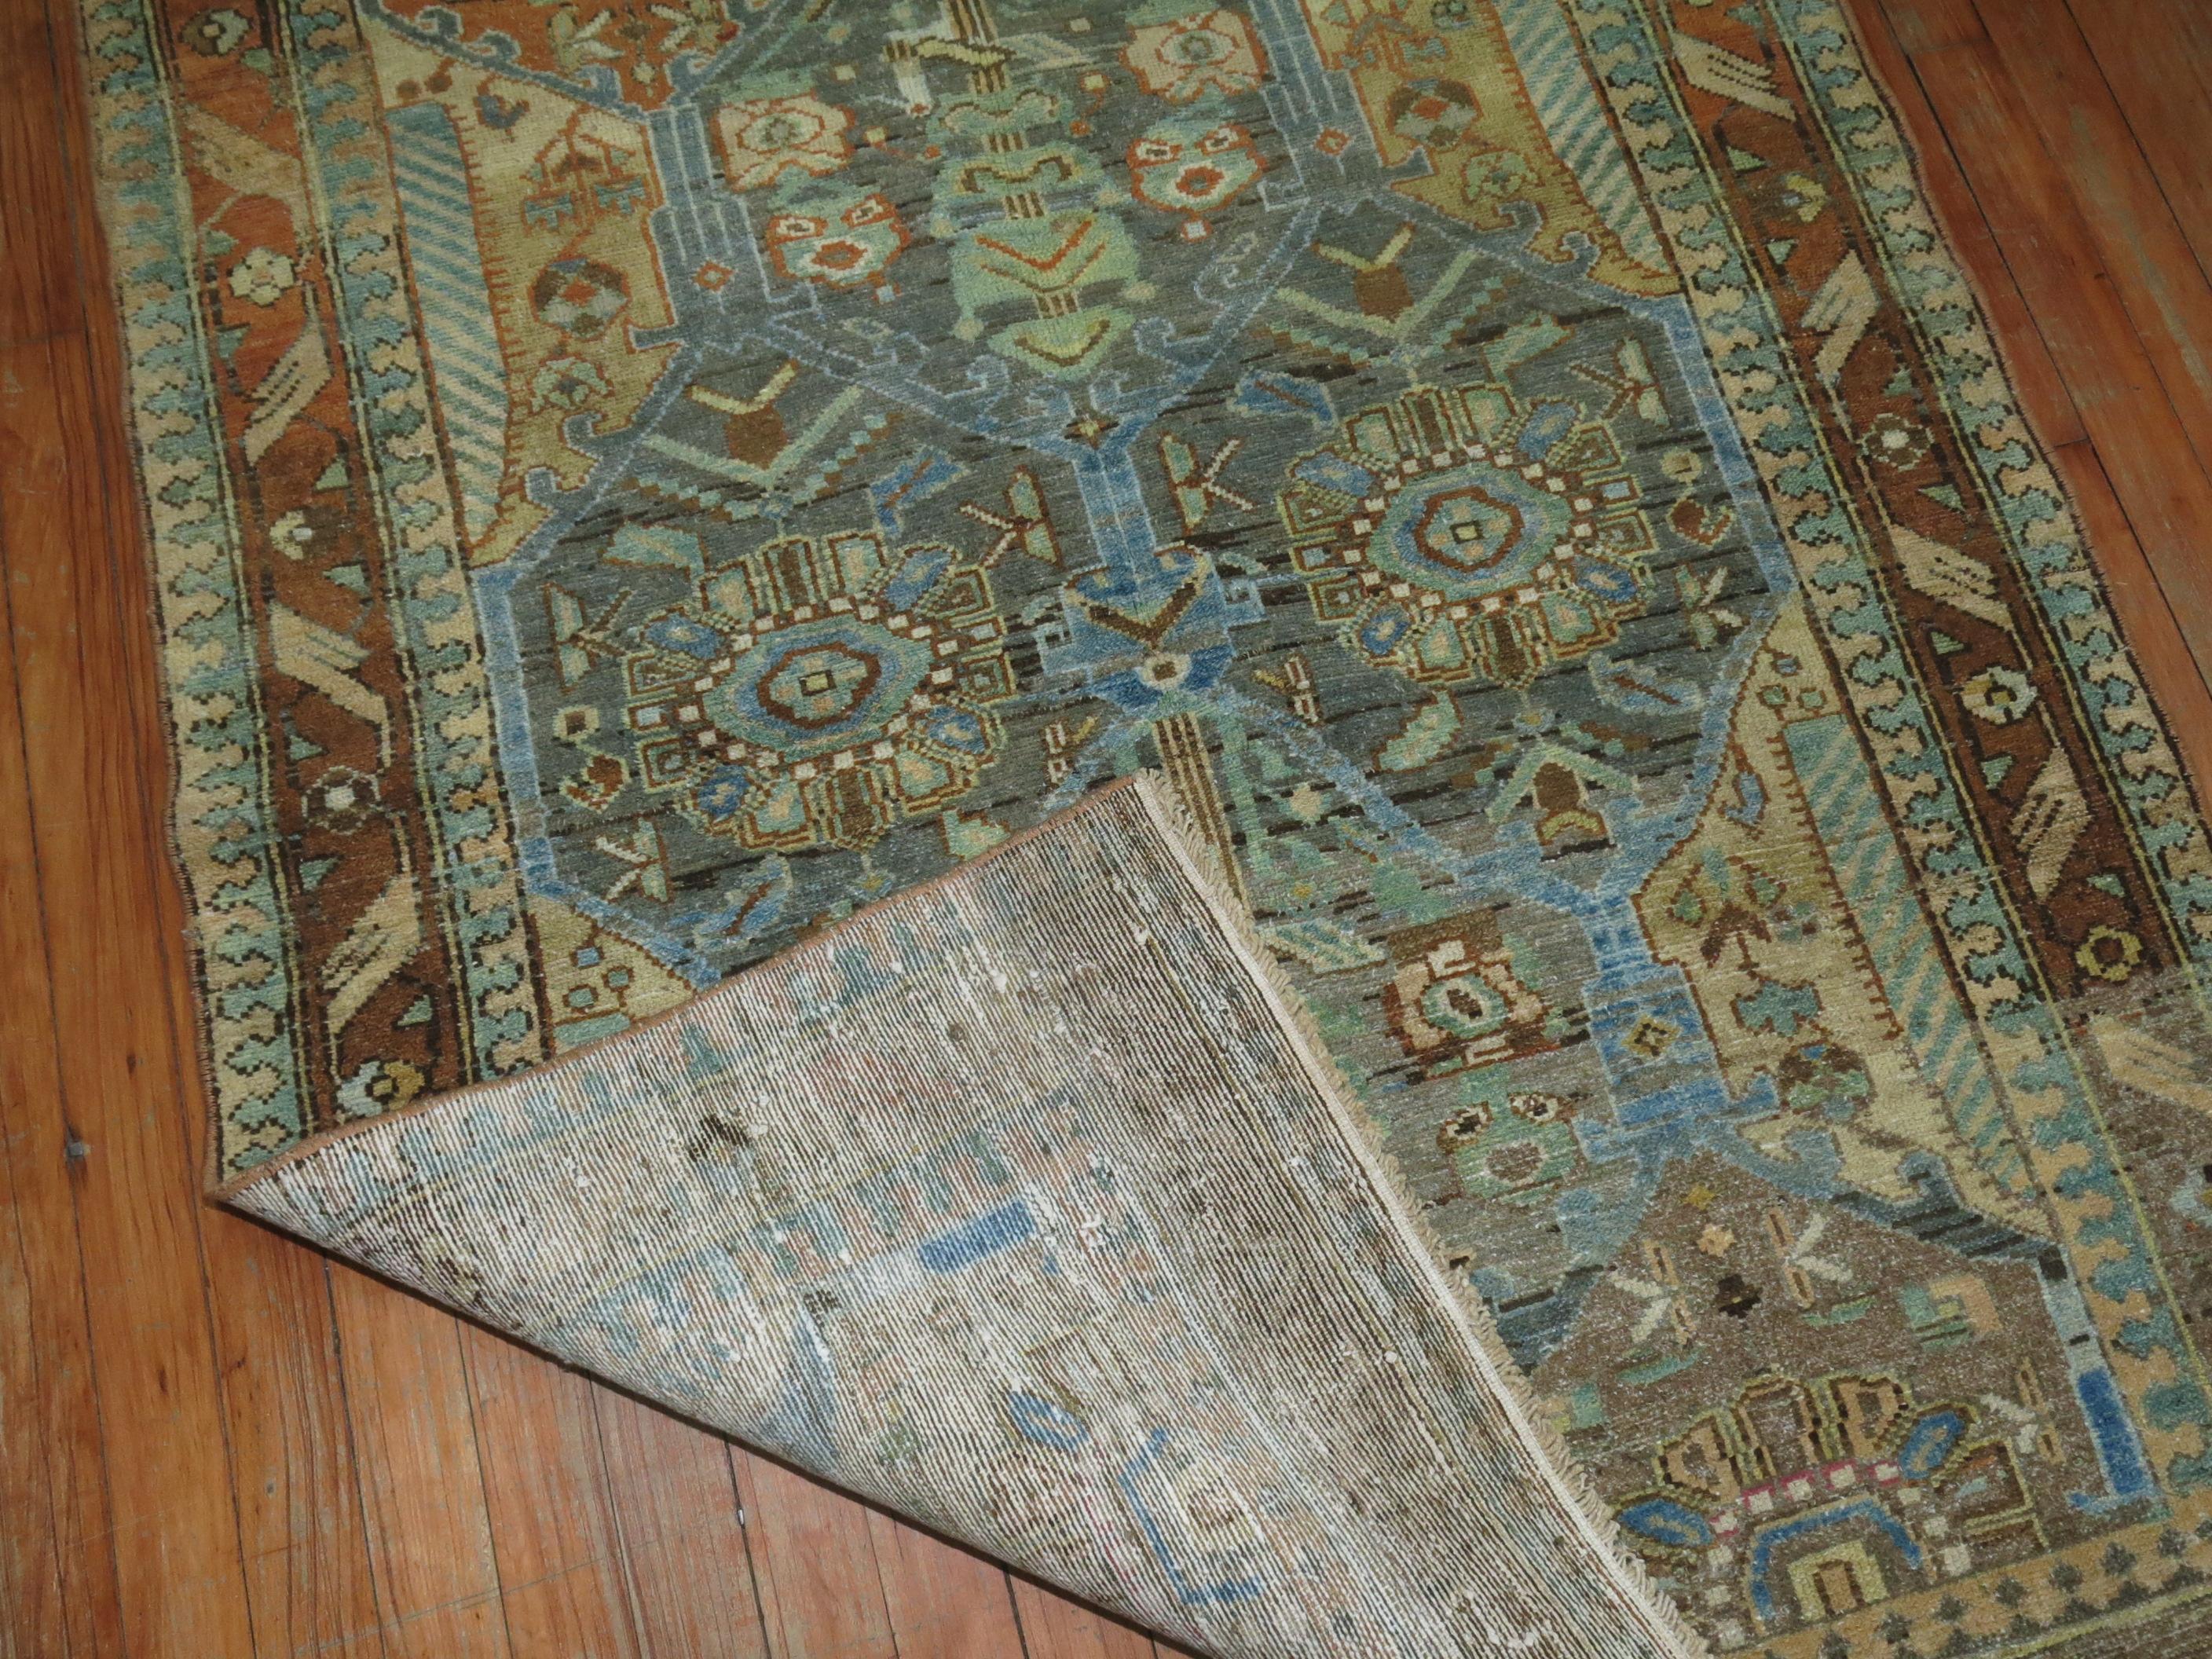 Hand-Woven Eloquent Persian Malayer Scatter Square Rug